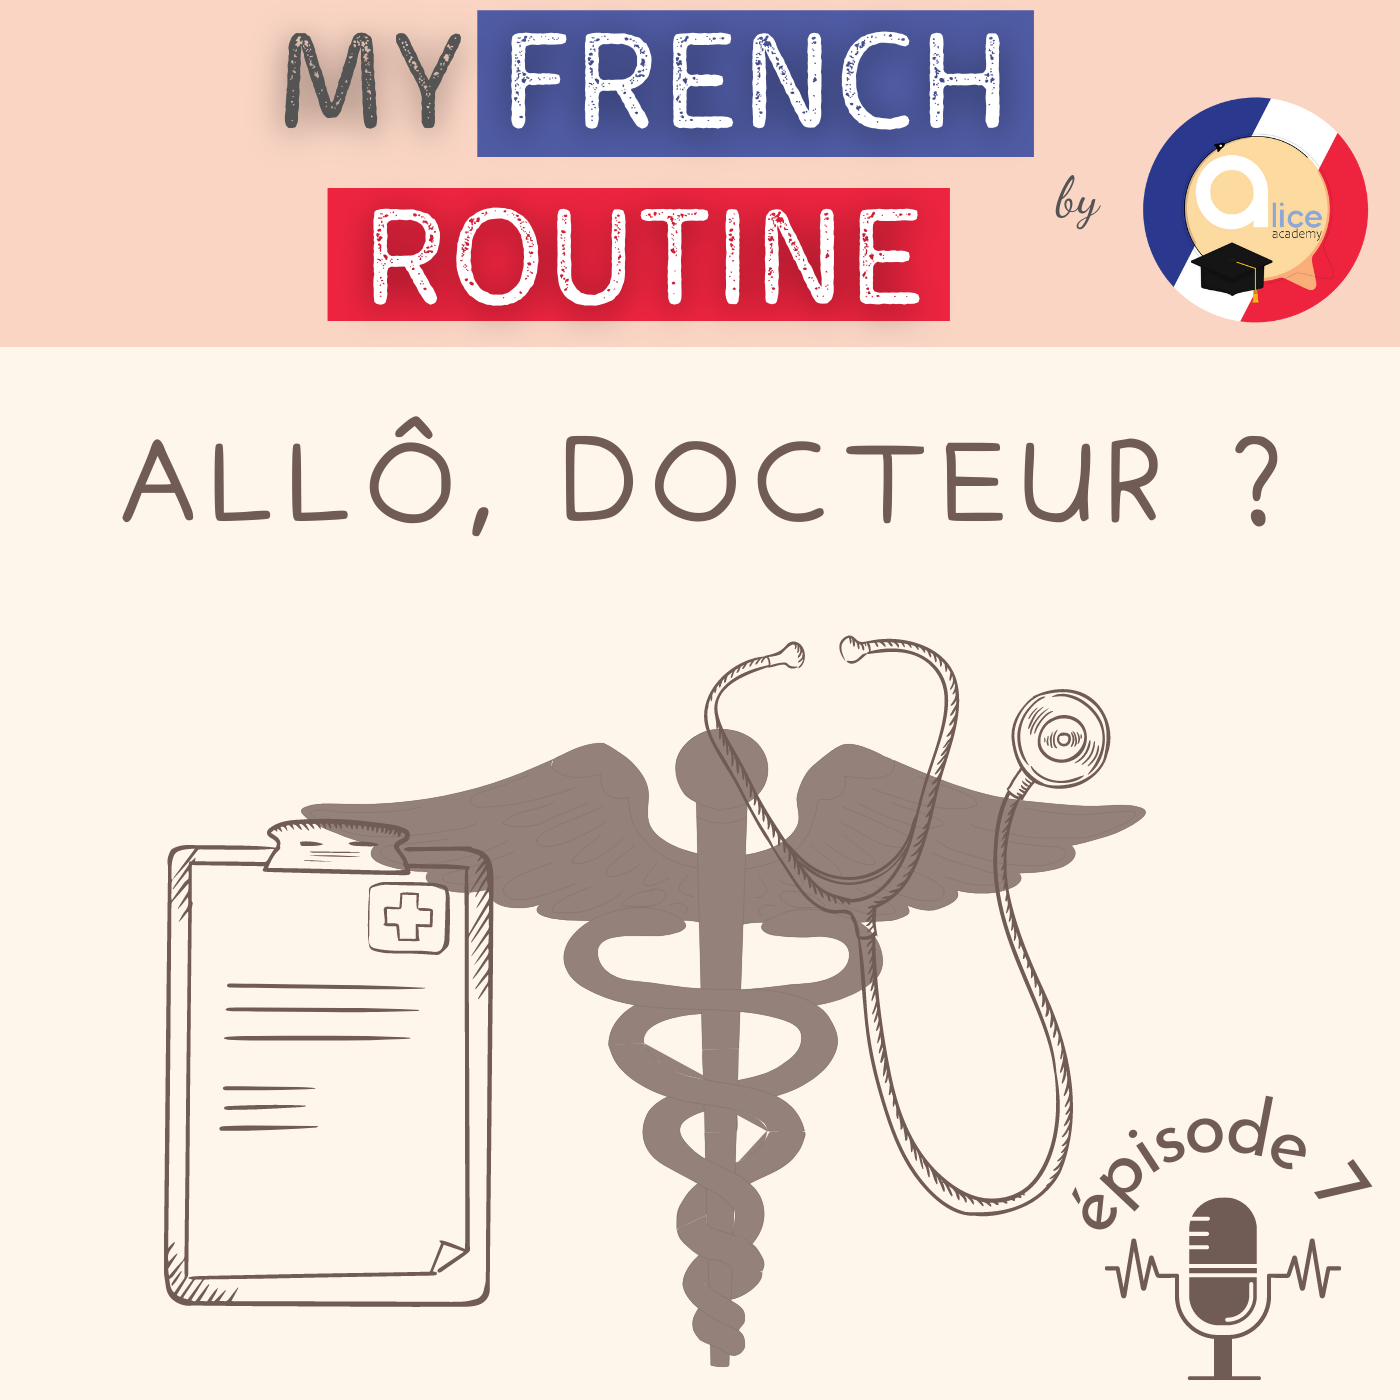 Allô docteur - My French Routine